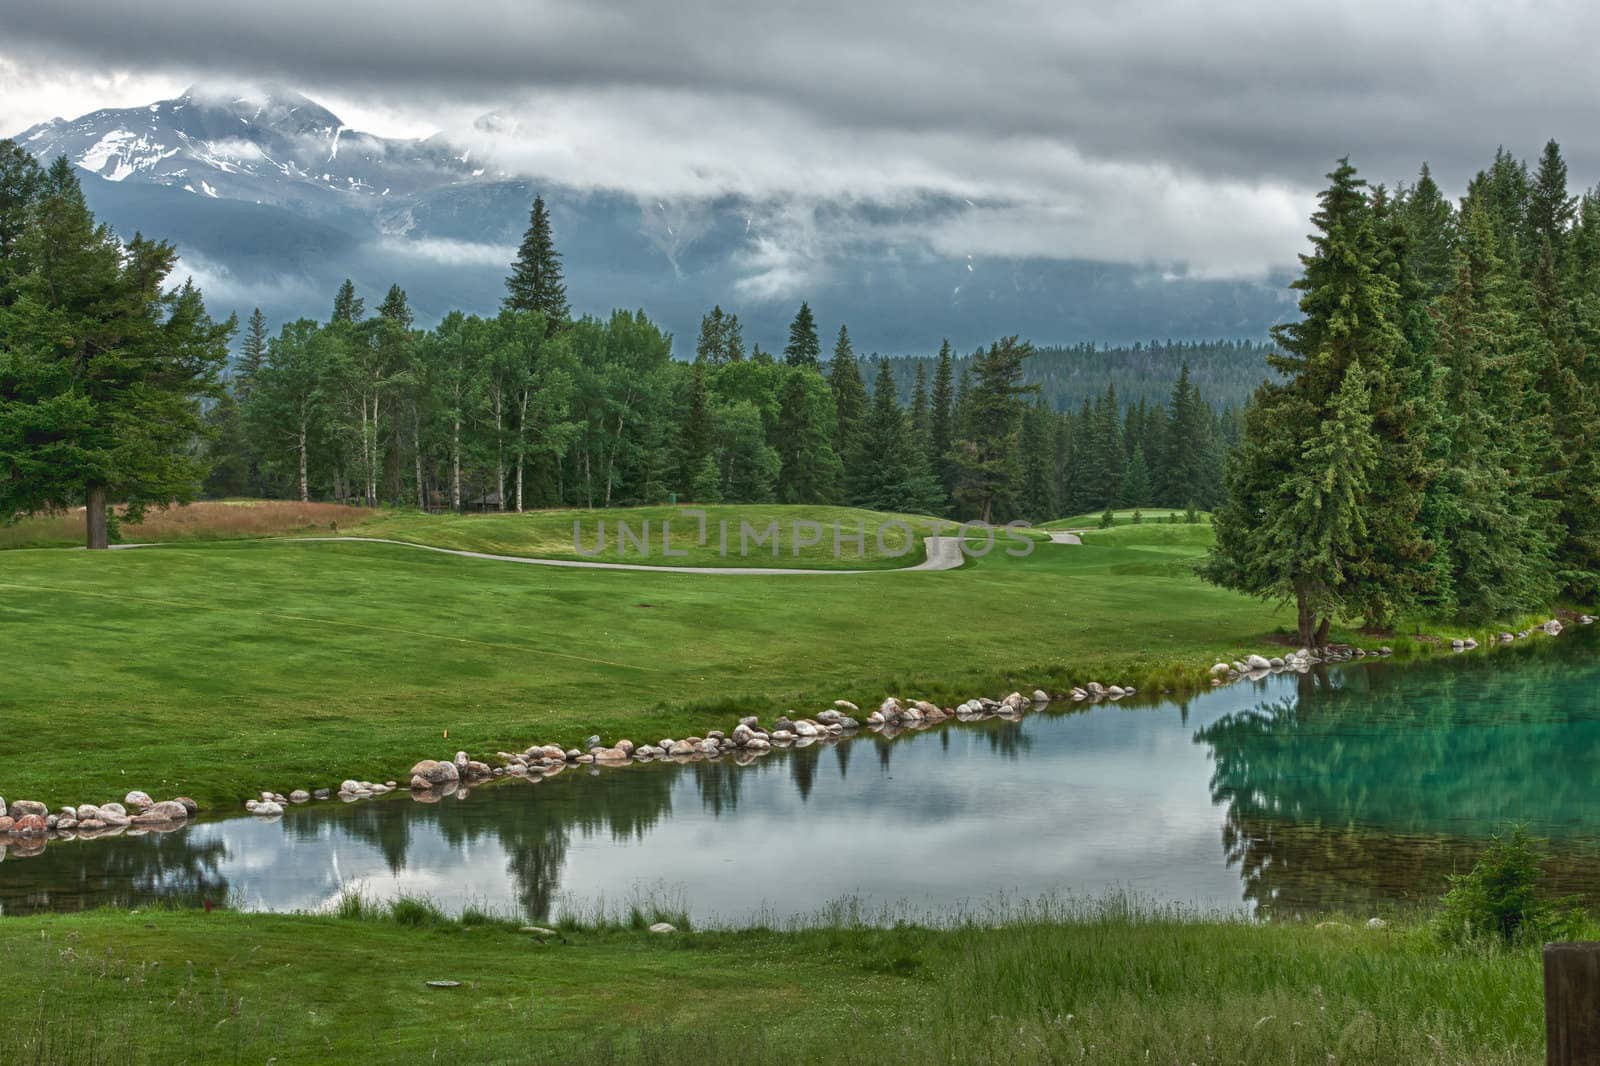 Golf course near lake near Jasper in the Canadian Rockies agains by Claudine